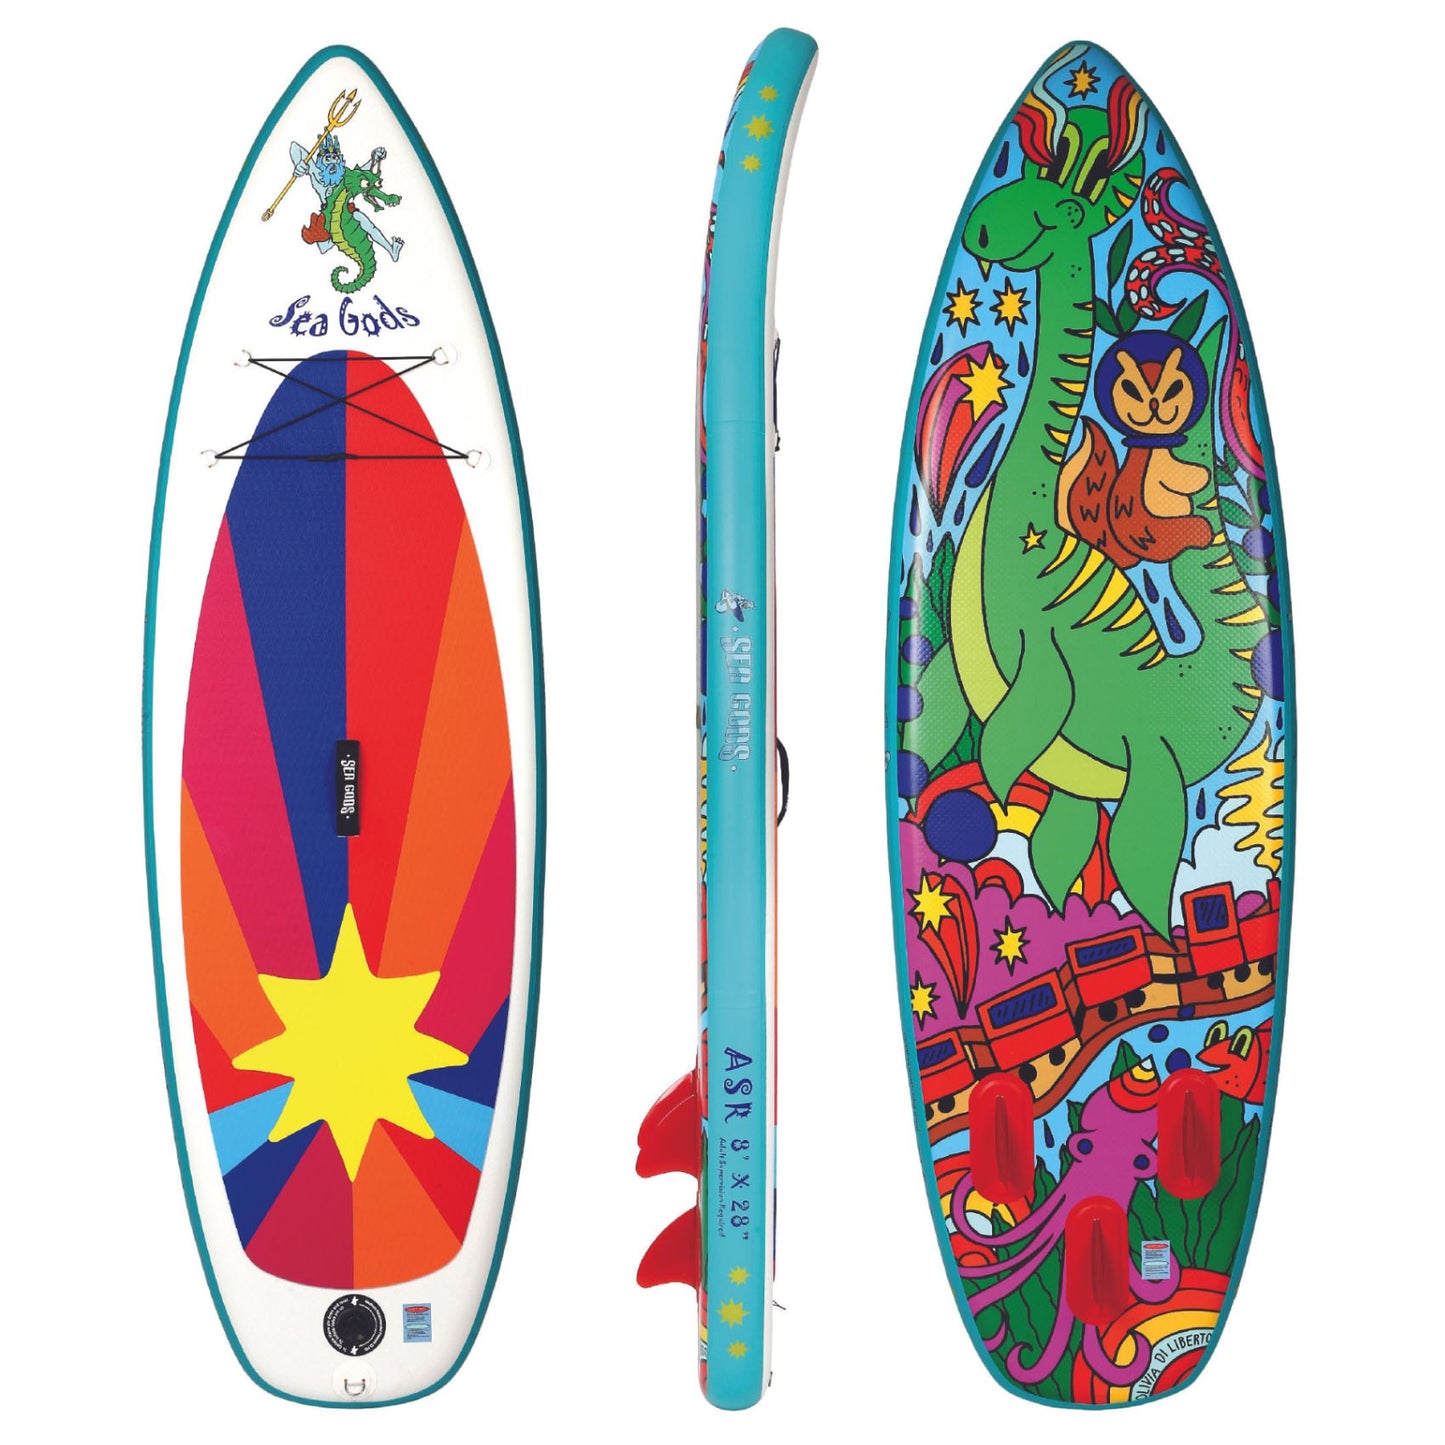 ASR Inflatable Paddleboard (Adult Supervision Required Kids ISUP) By Sea Gods